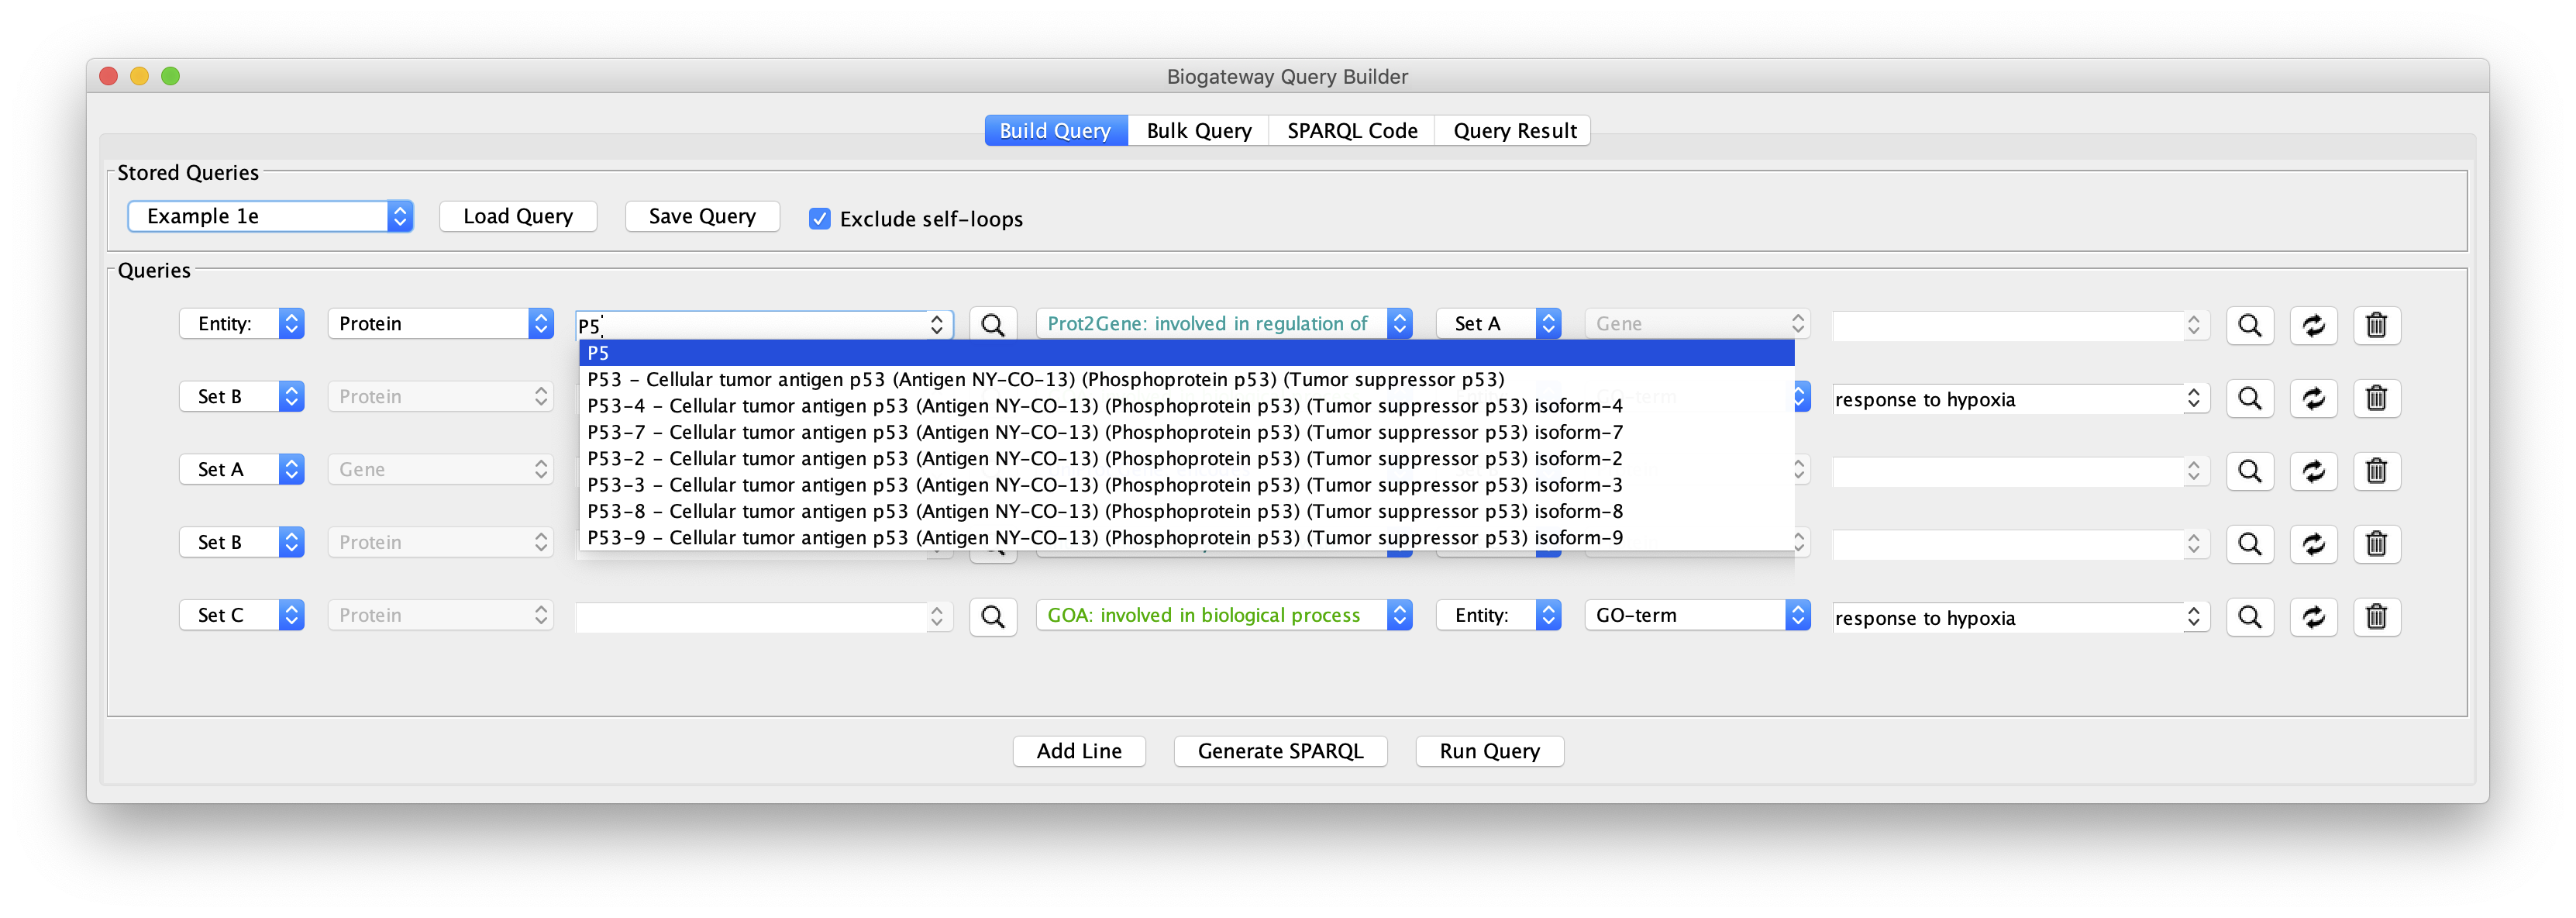 Figure 12: Example of the Autocomplete function. When entering another entity name the autocomplete provides a drop-down list with matching entities, from which you may choose the appropriate one to build a query centered around that protein.